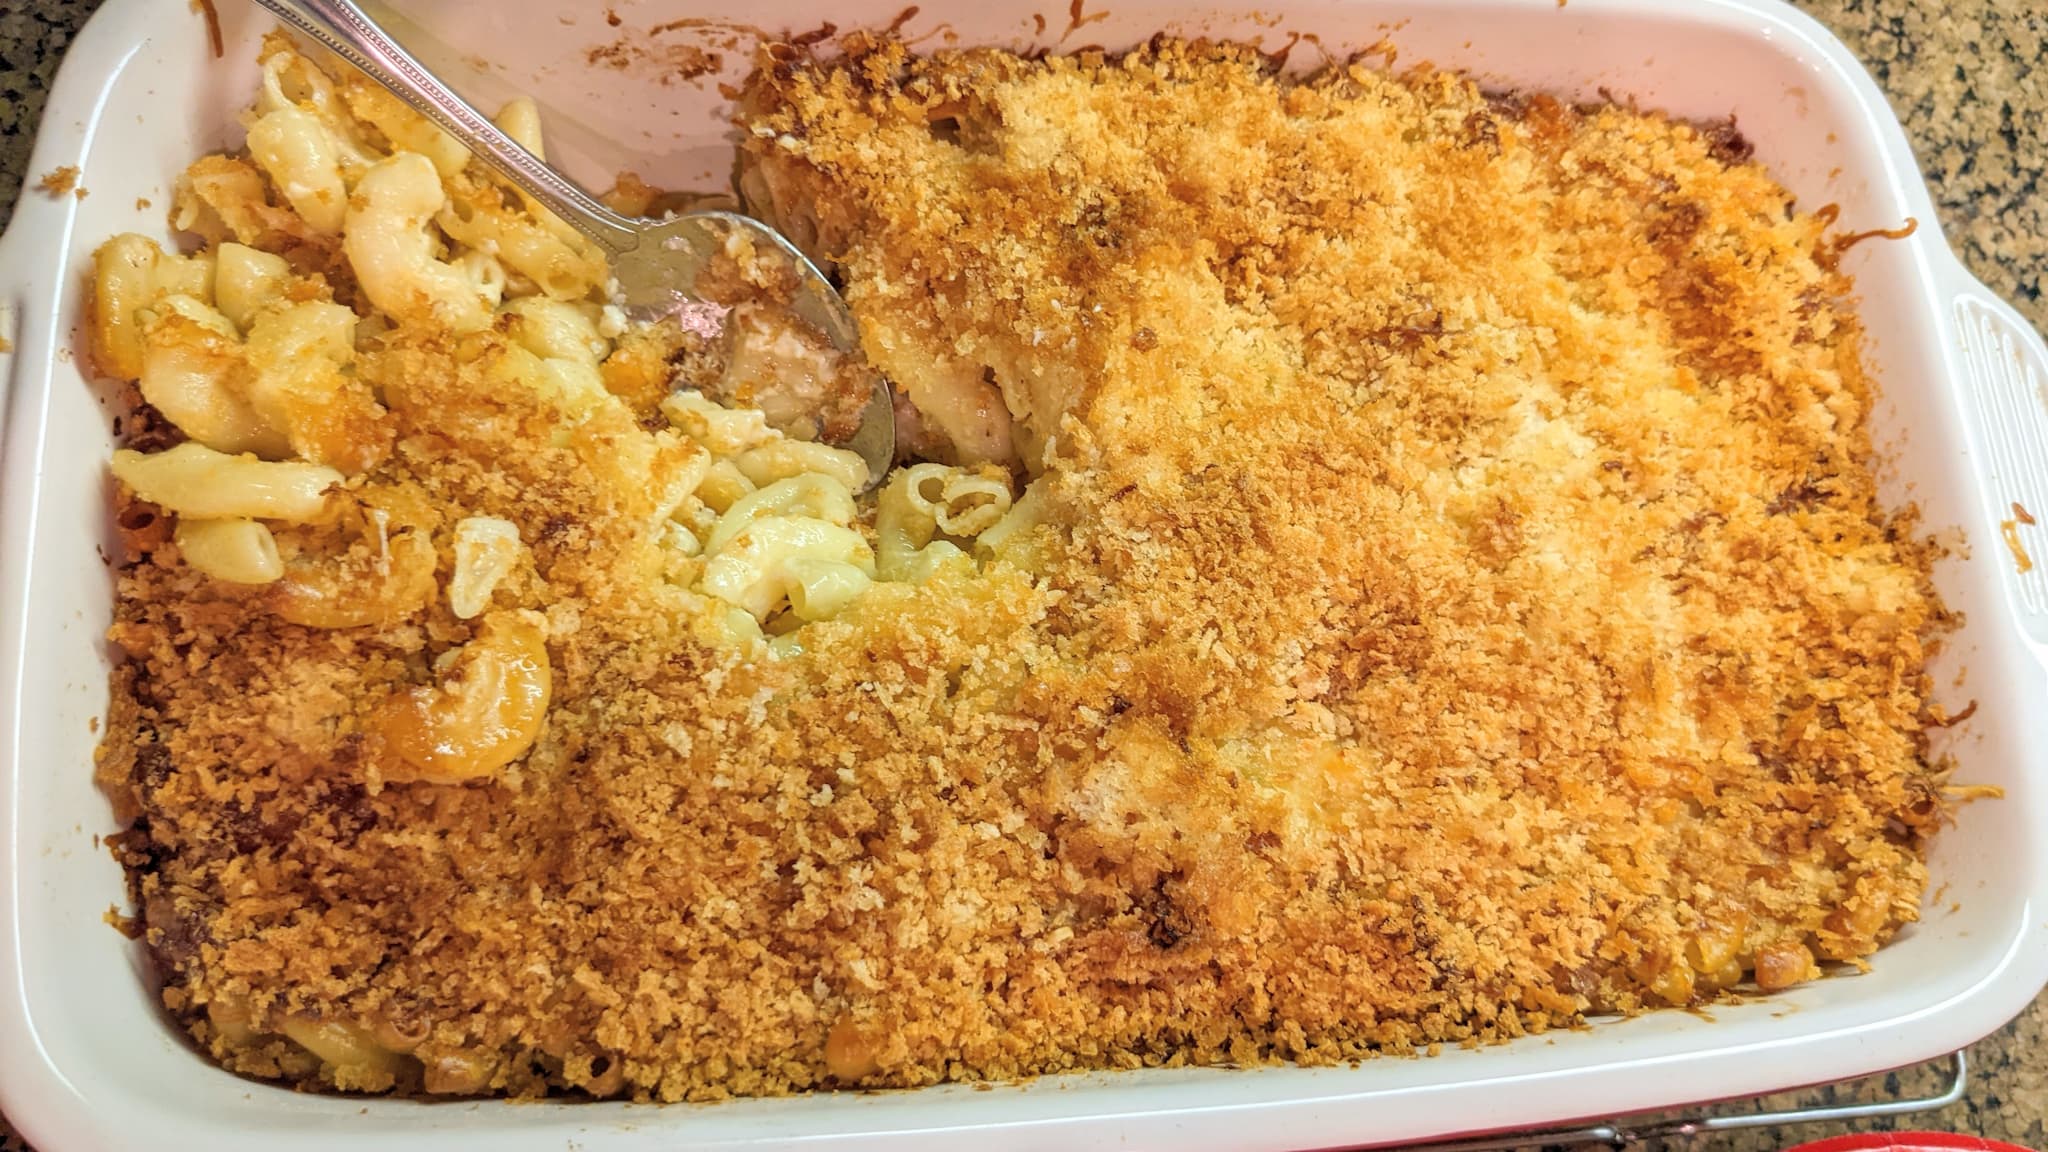 Casserole dish with baked macaroni and cheese topped with breadcrumbs.